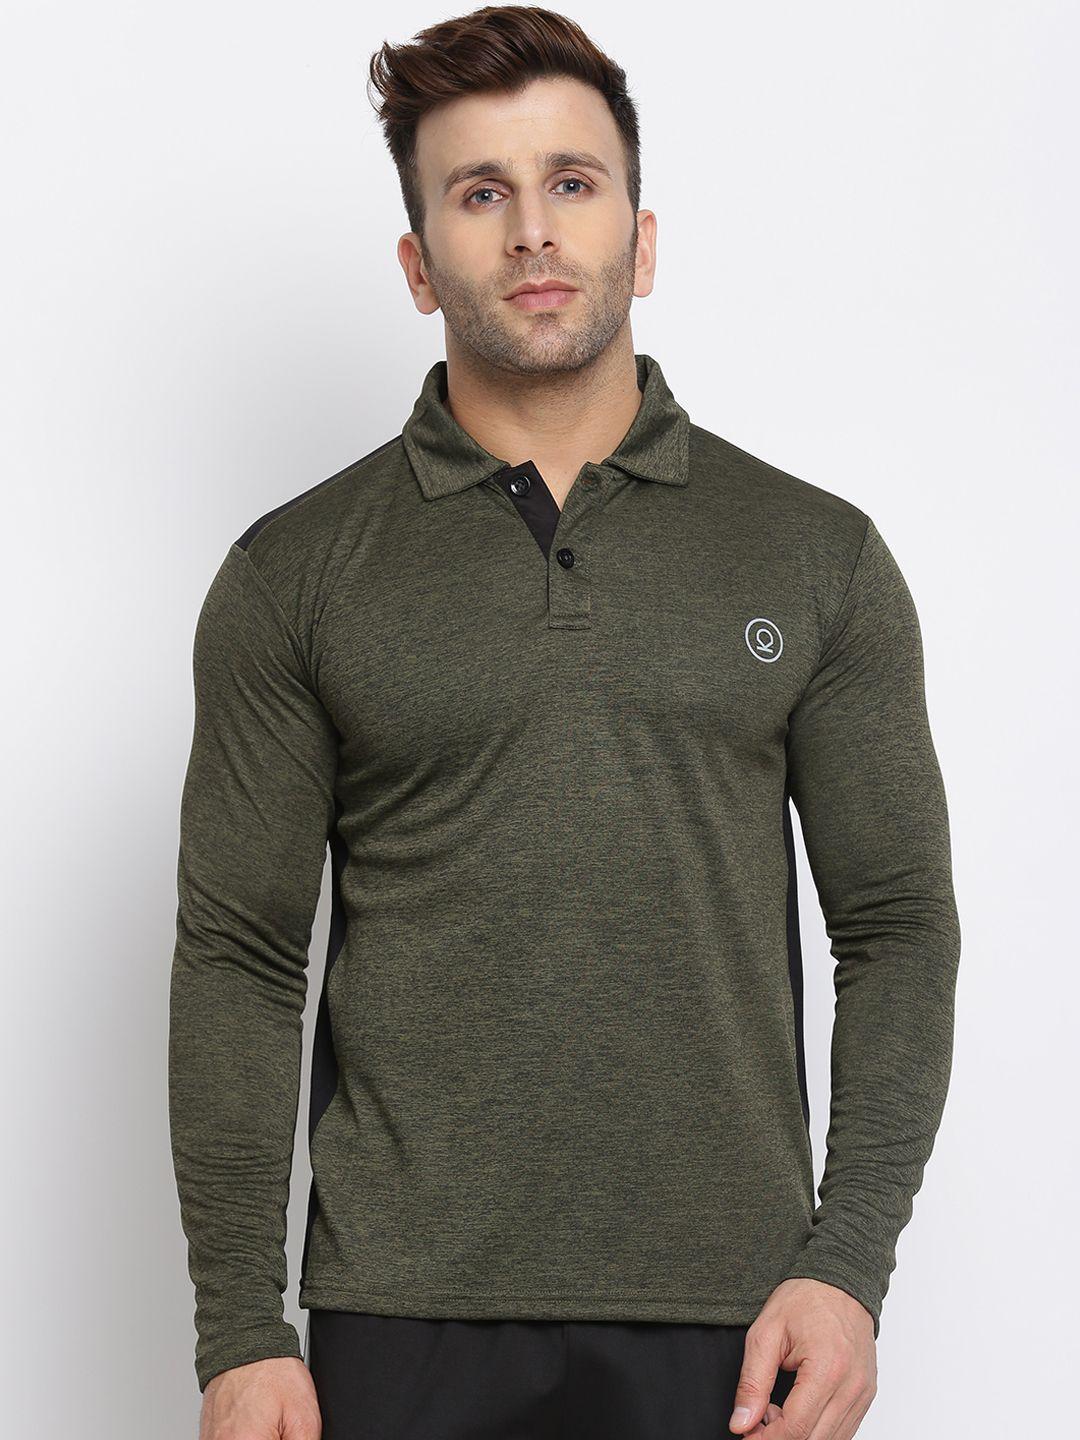 chkokko men olive green solid polo collar dry fit streachable training t-shirt